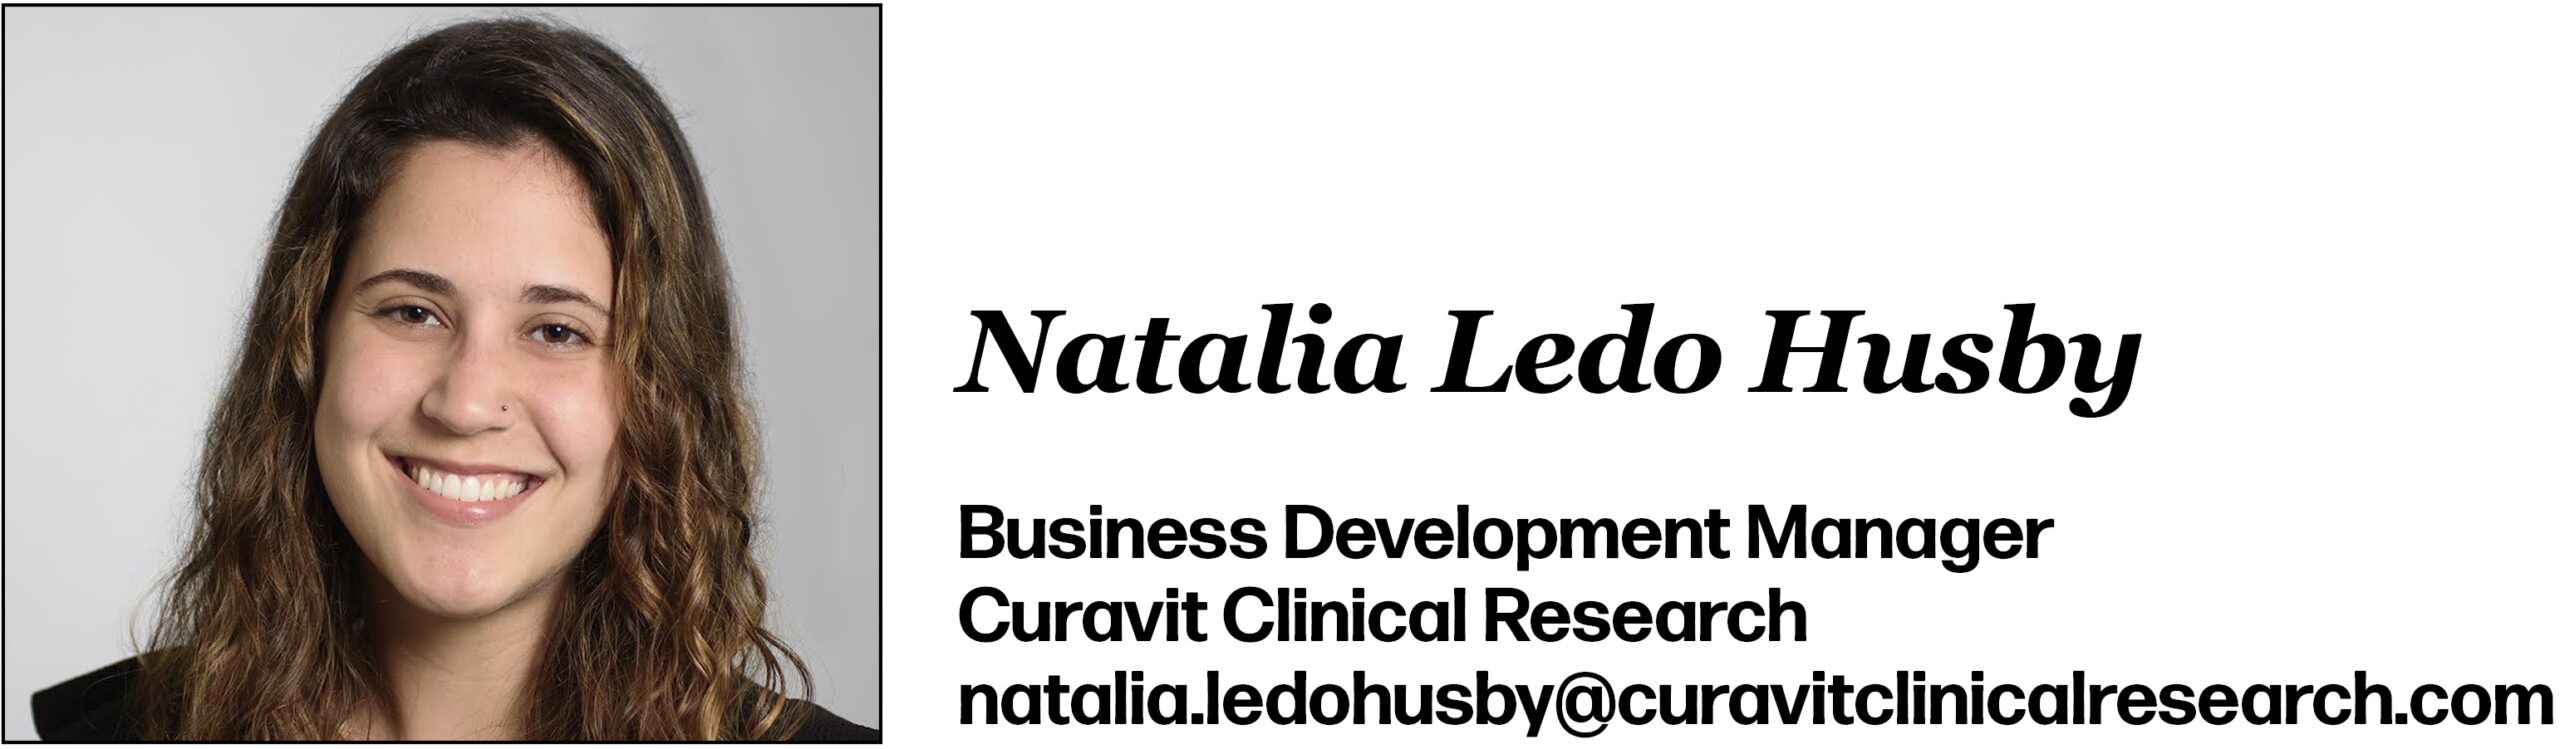 Natalia Ledo Husby Business Development Manager Curavit Clinical Research natalia.ledohusby@curavitclinicalresearch.com